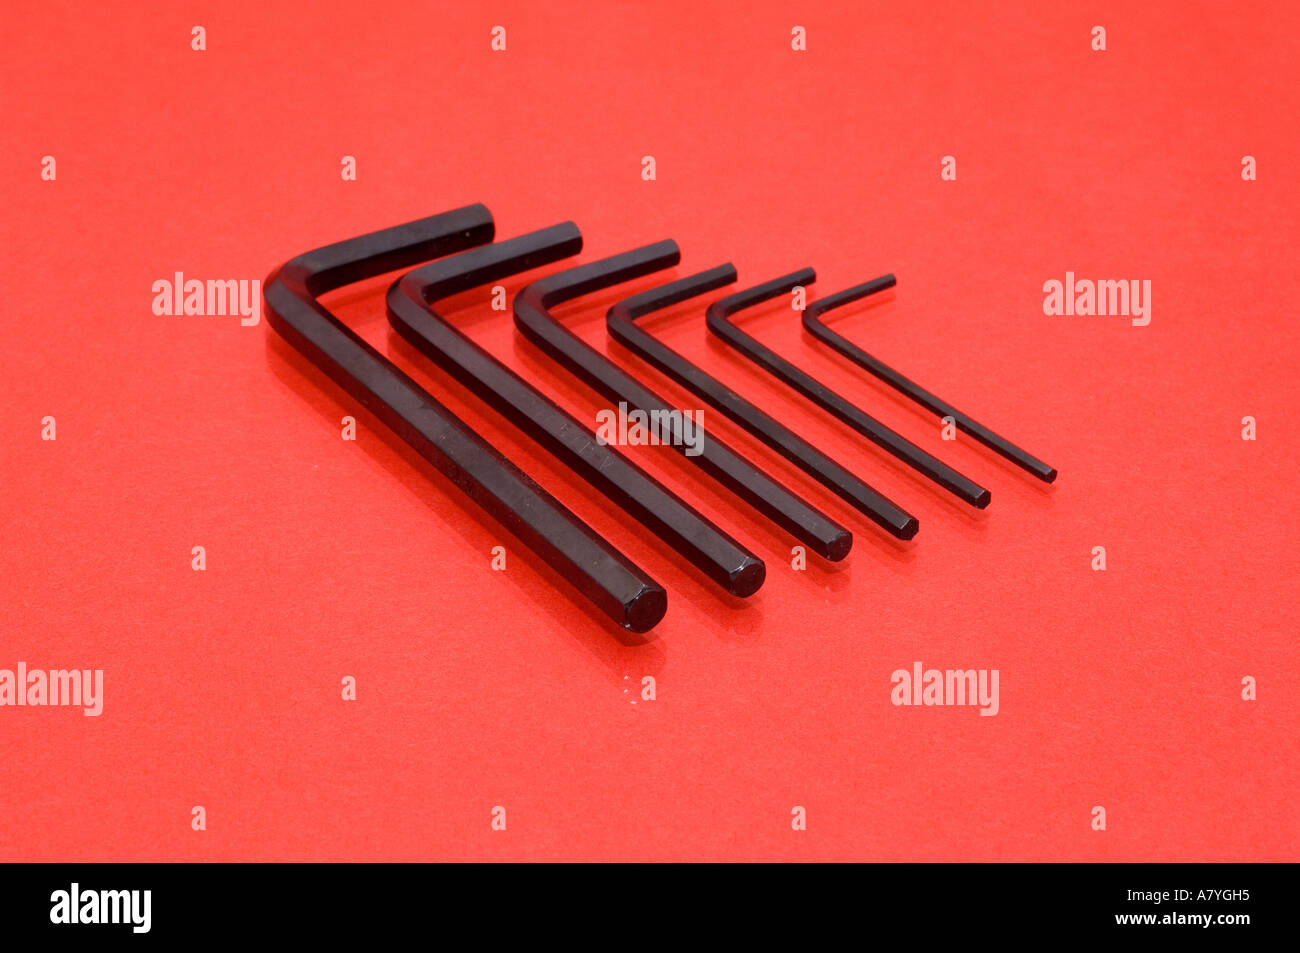 Set of small Allen keys on a red background Stock Photo